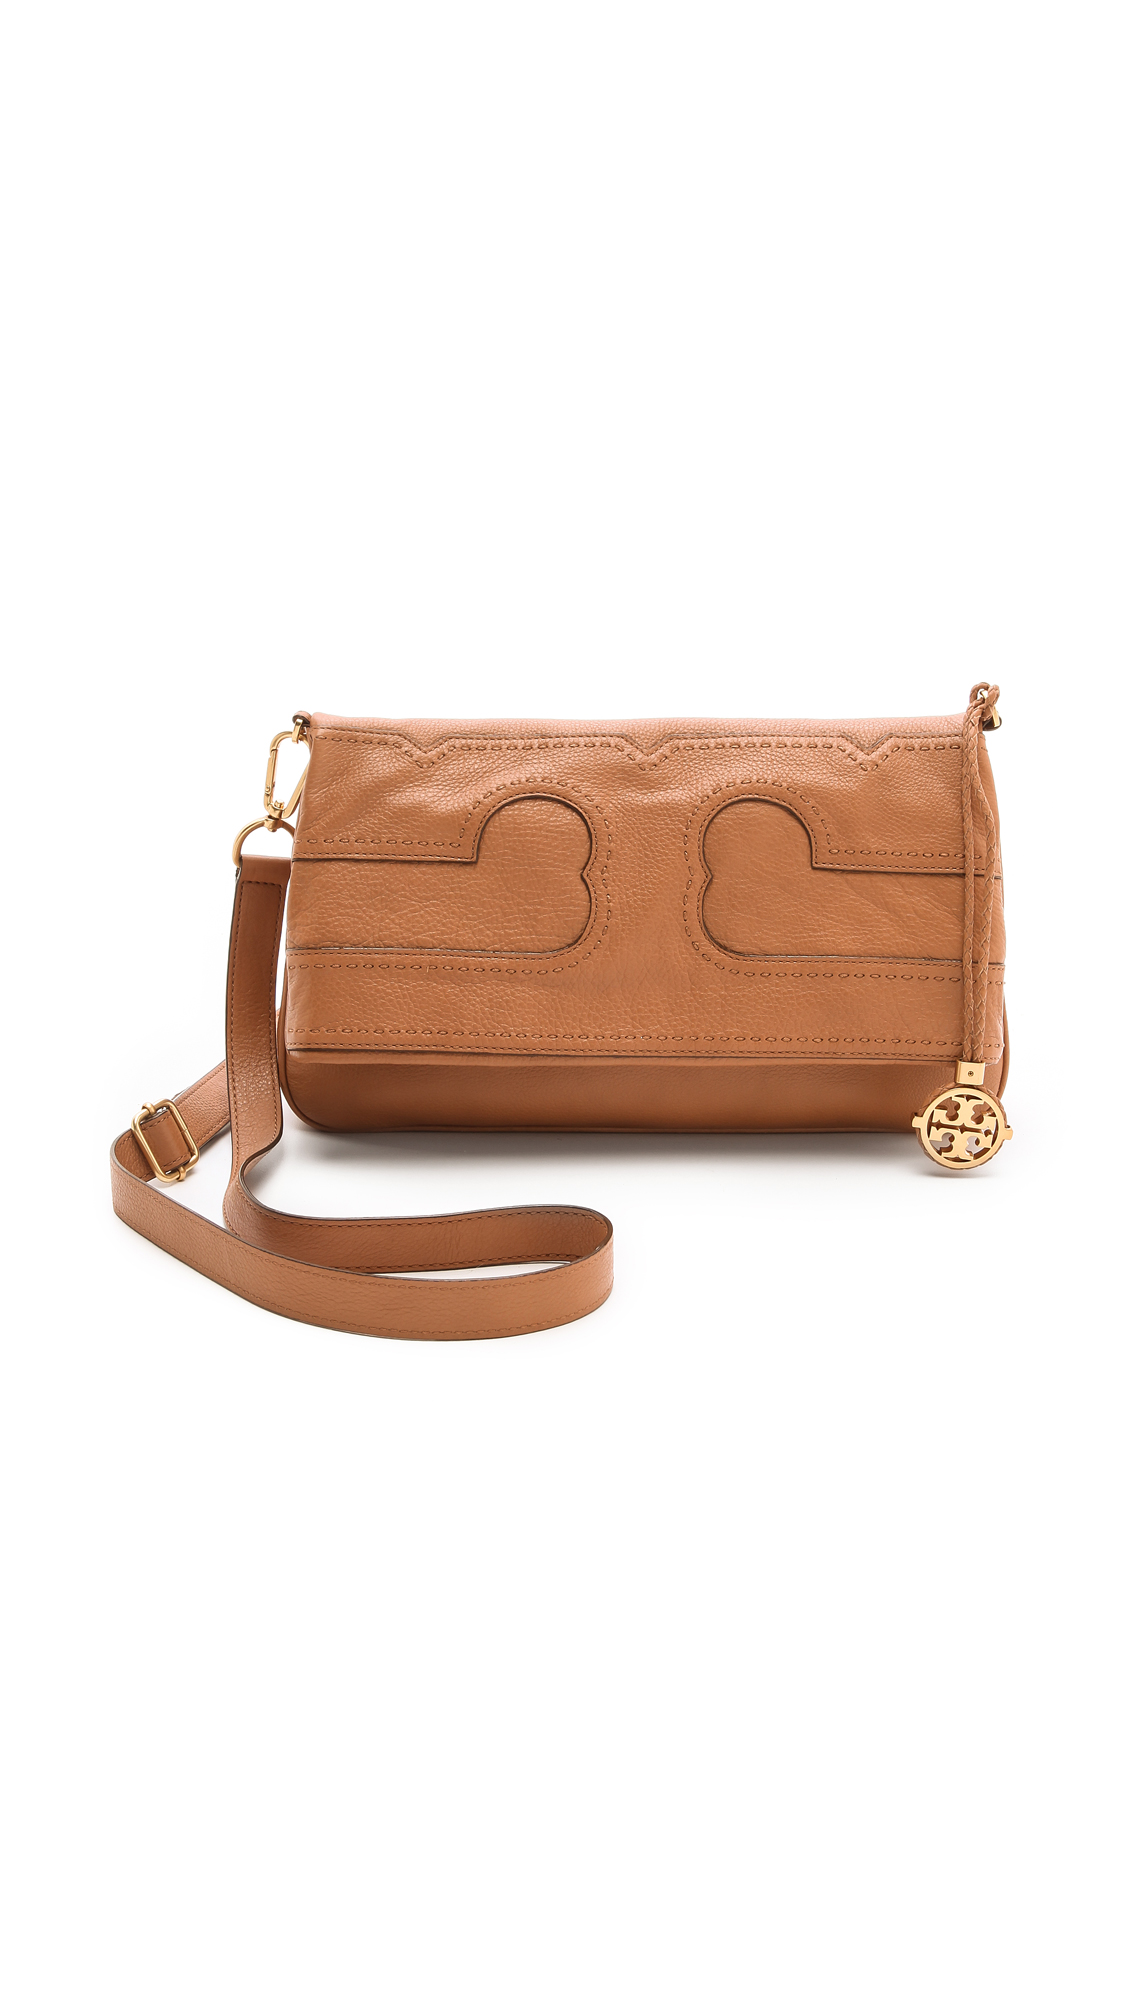 Tory Burch Amalie Fold Over Messenger Bag in Brown | Lyst